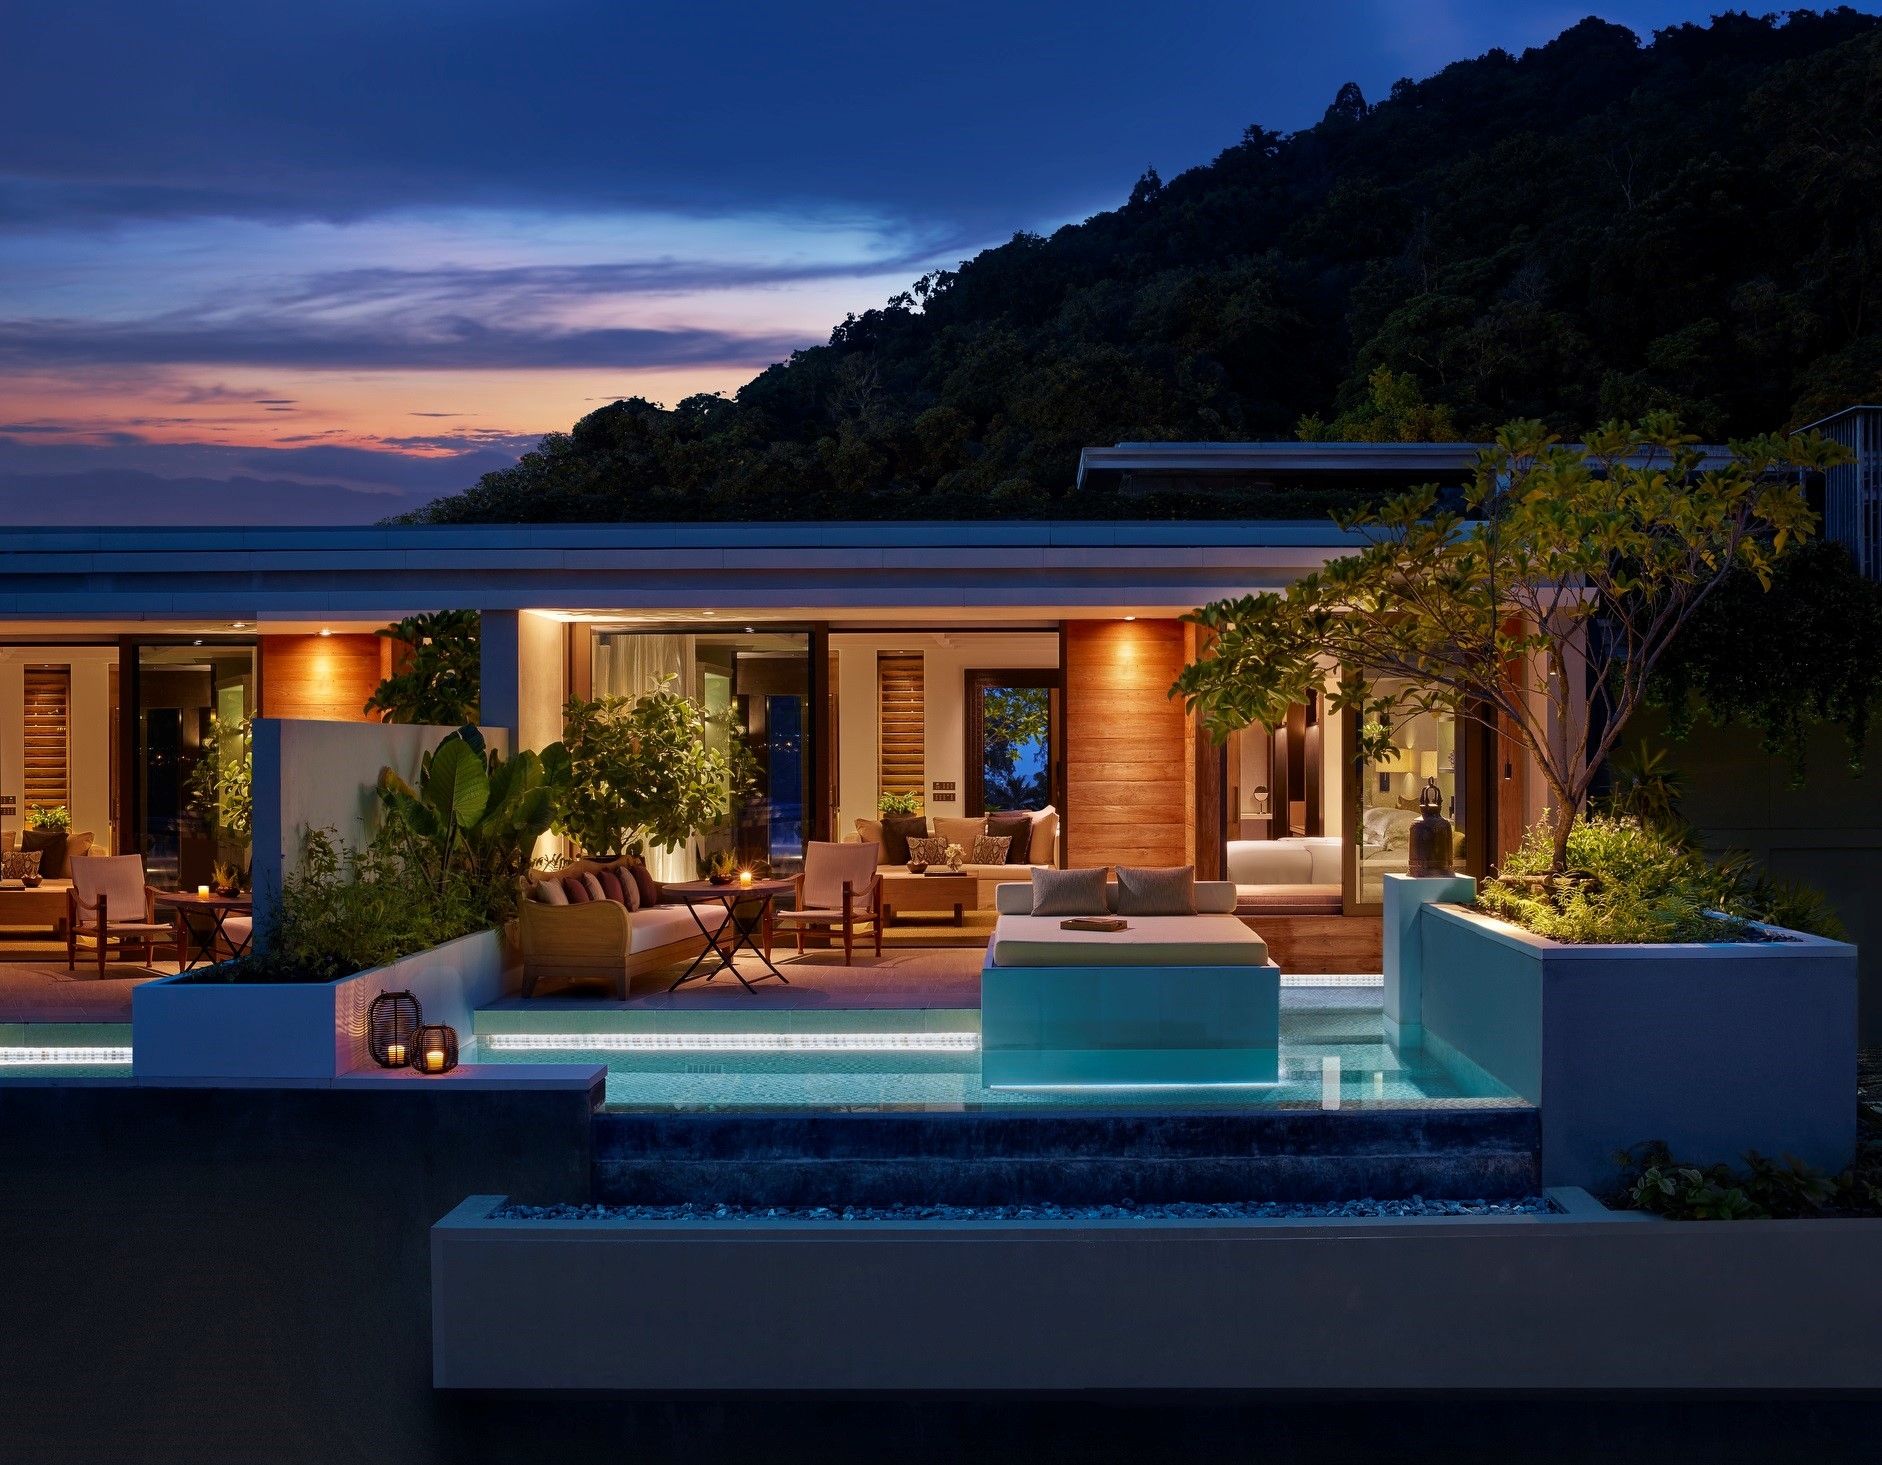 Rosewood Ocean View Pavilion - West Coast Thailand in Style